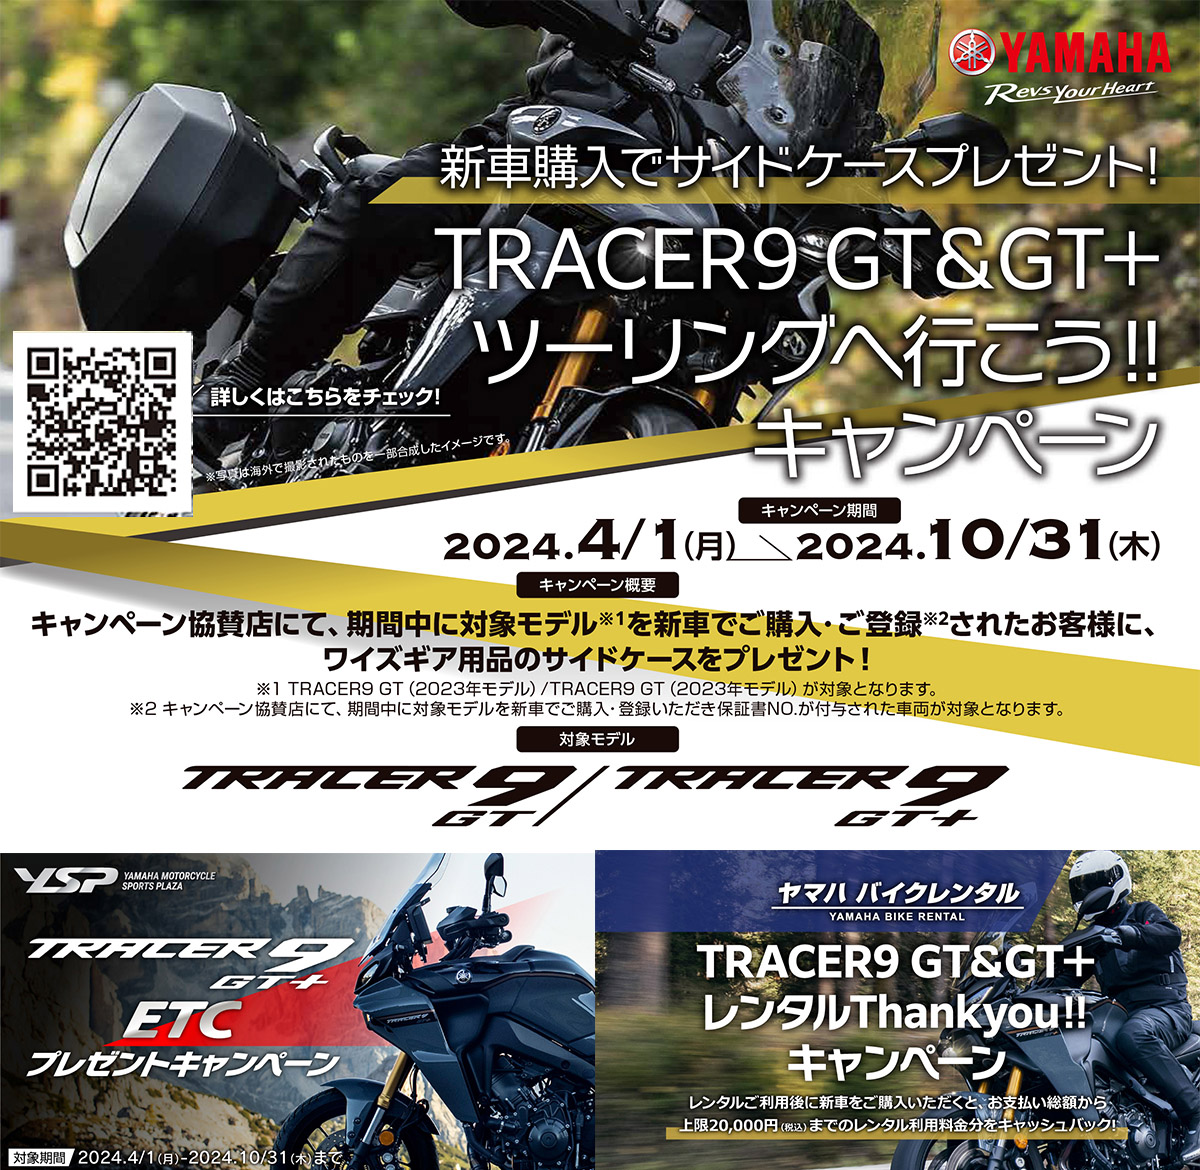 TRACER9GT系が対象のキャンペーン続々！！